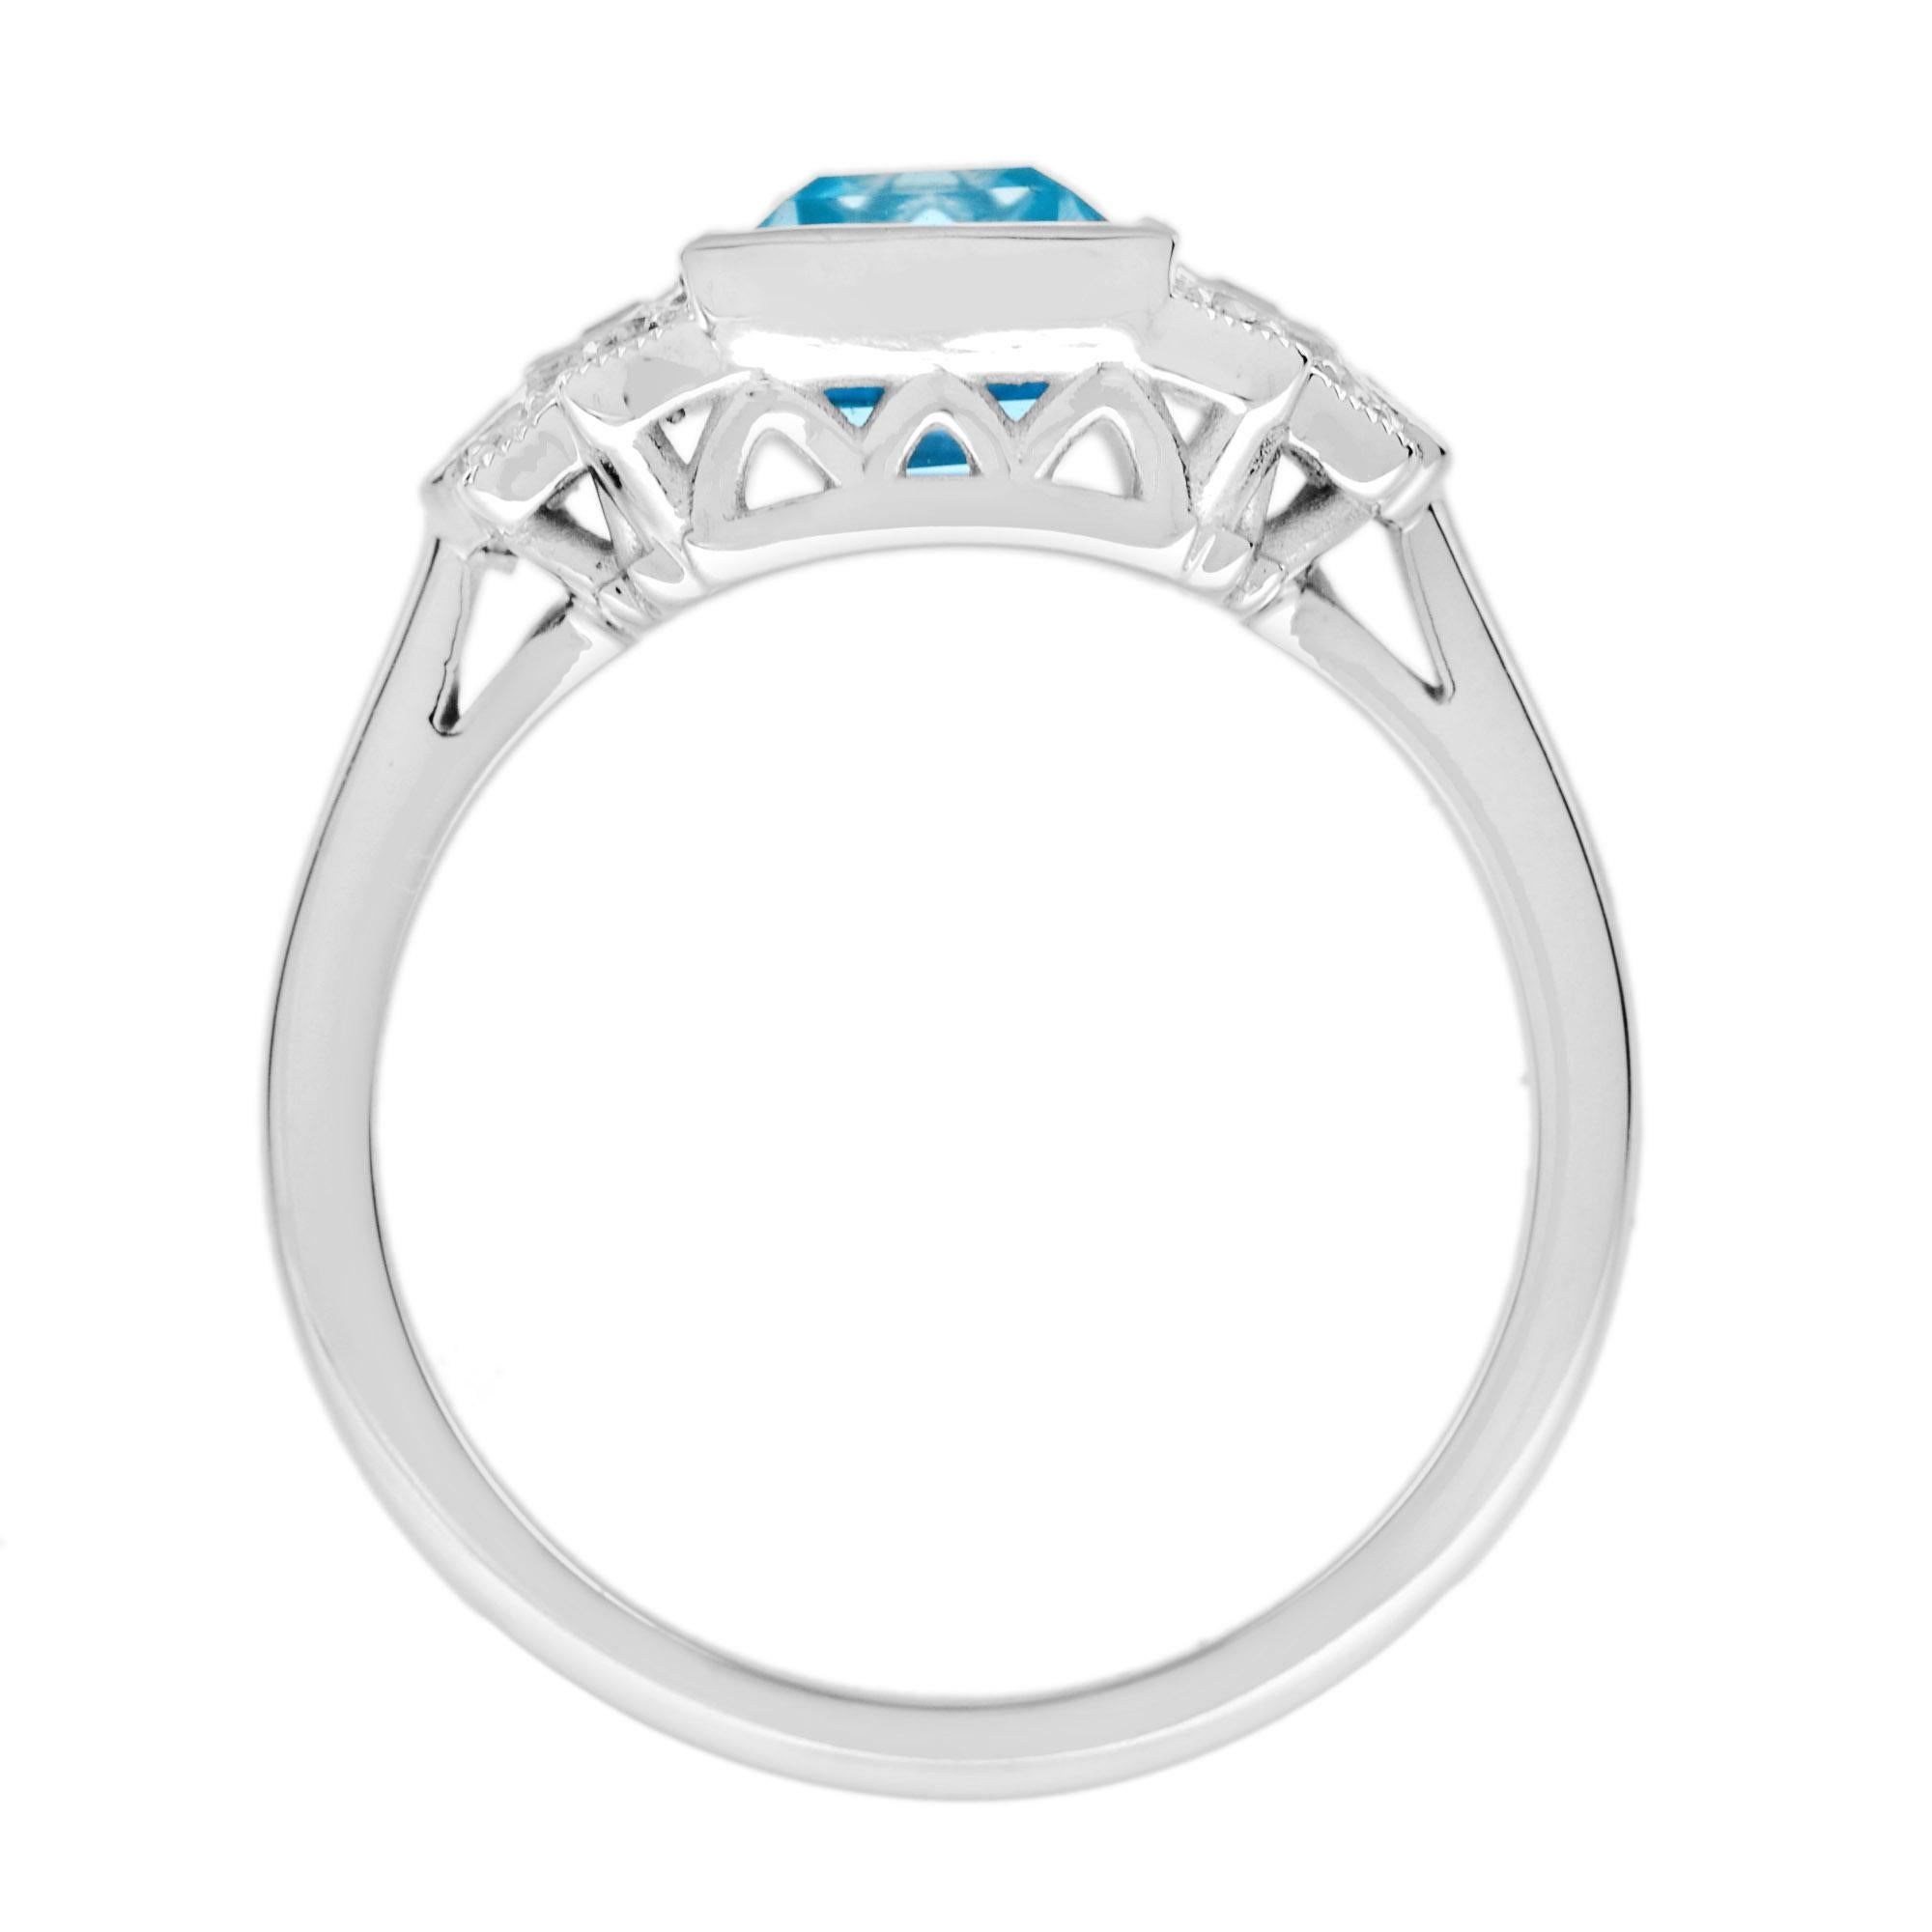 3.50 Ct. Aquamarine and Diamond Art Deco Style Cocktail Ring in 18K White Gold For Sale 1